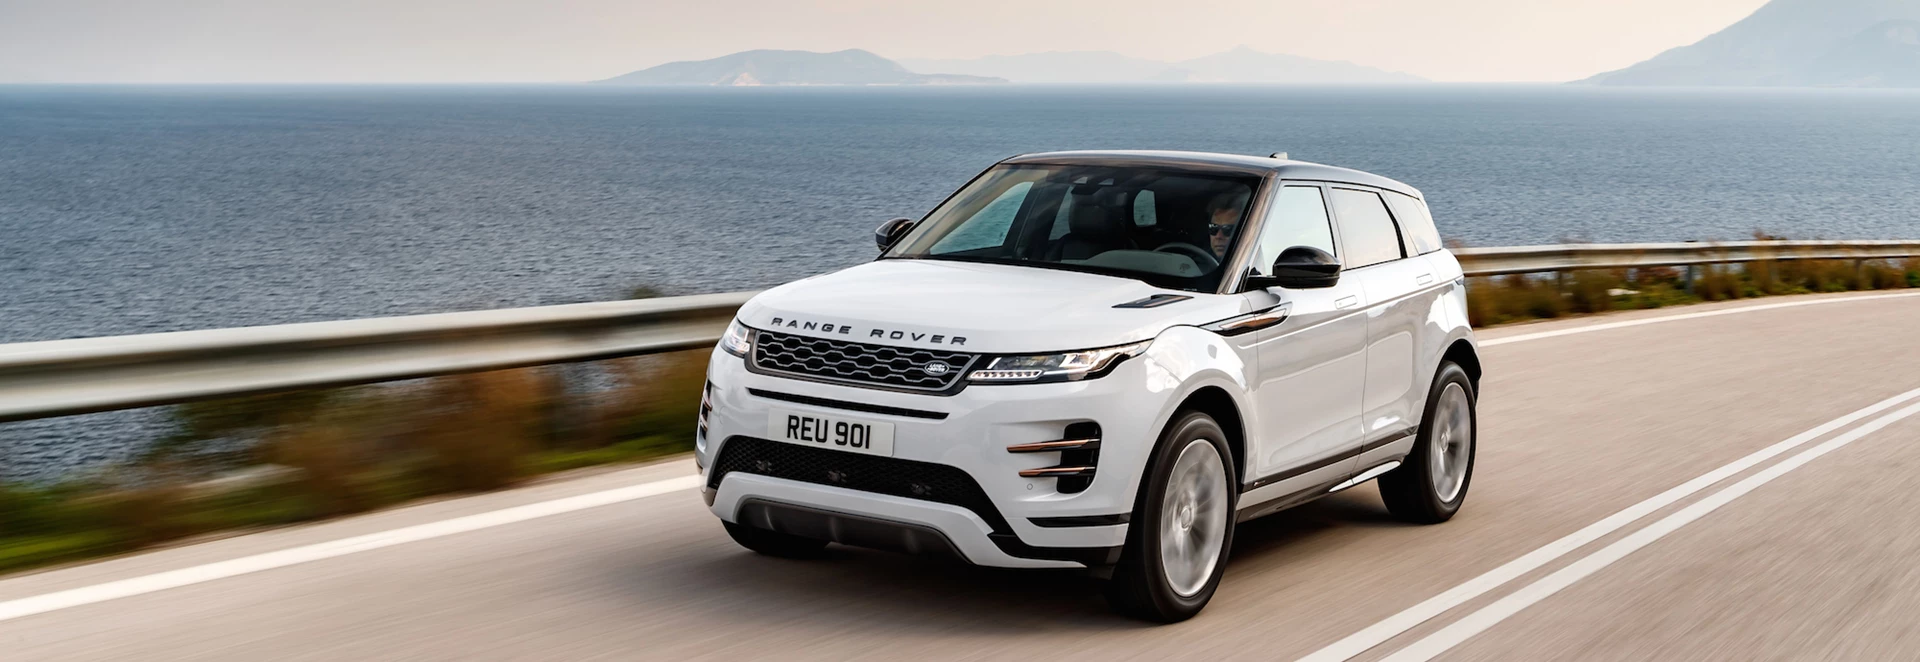 Why the Range Rover Evoque is a great investment